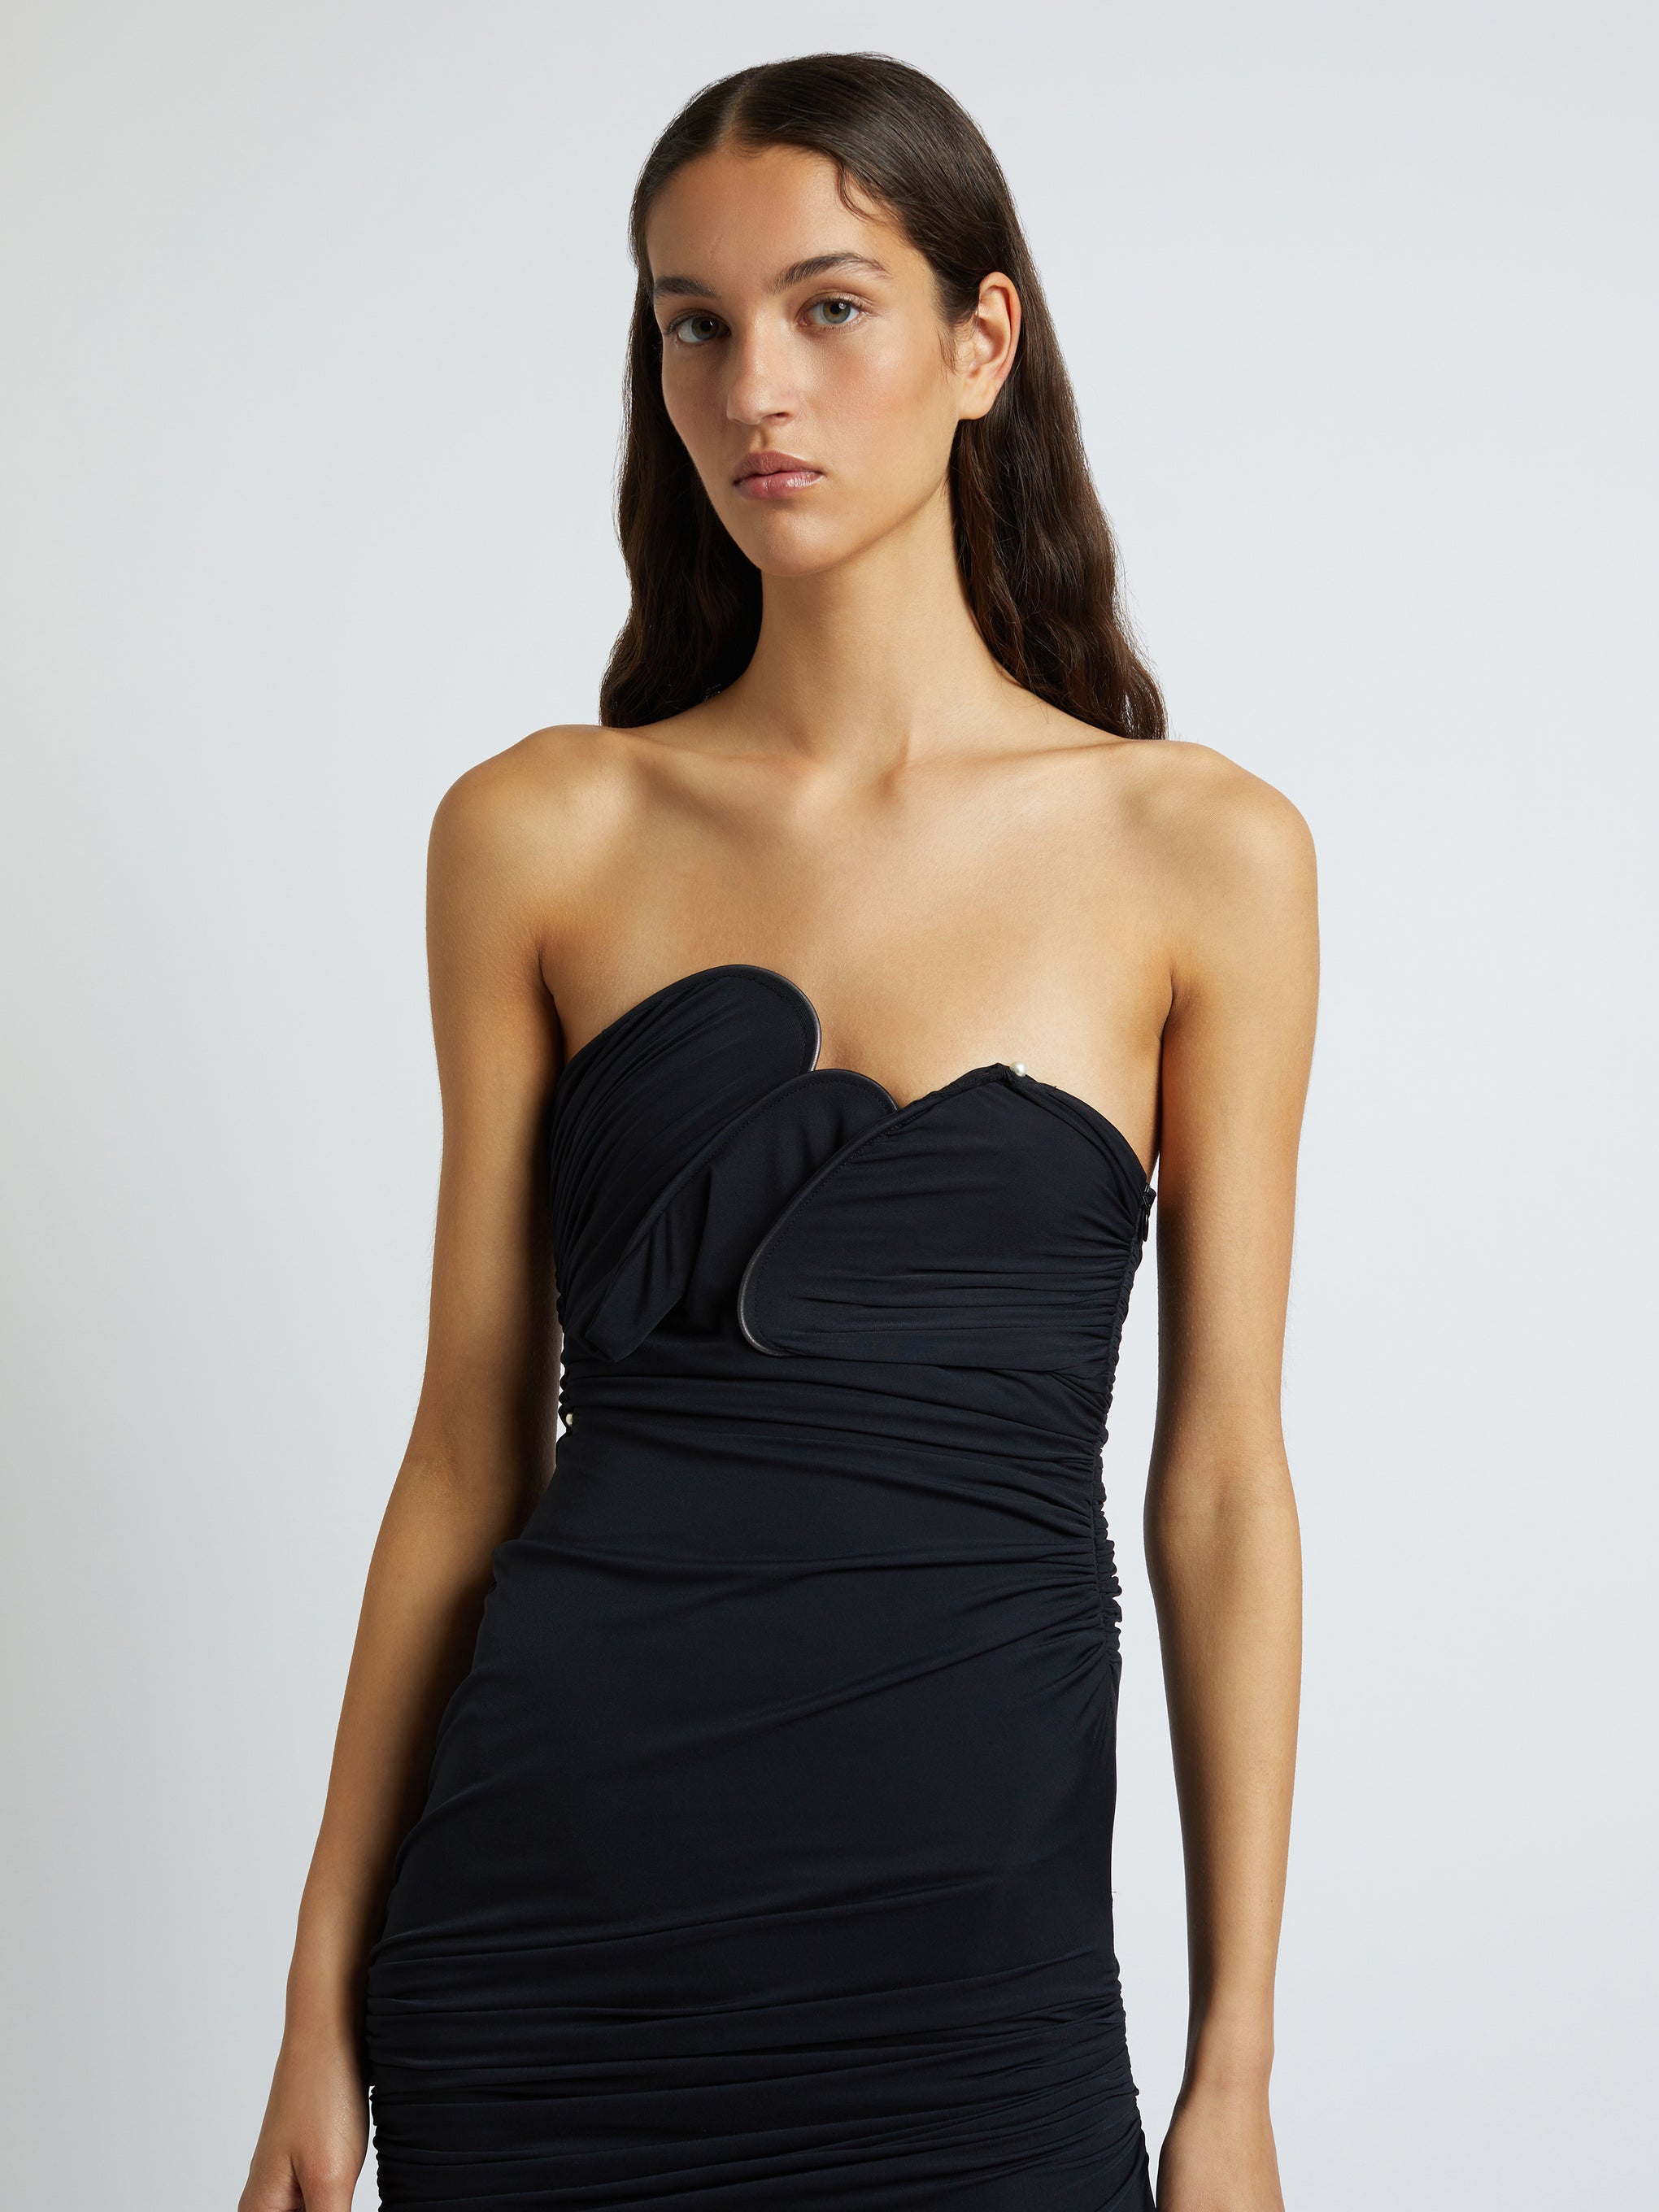 Christopher Esber Encompassed Looped Bodice Dress in Black available at The New Trend Australia.